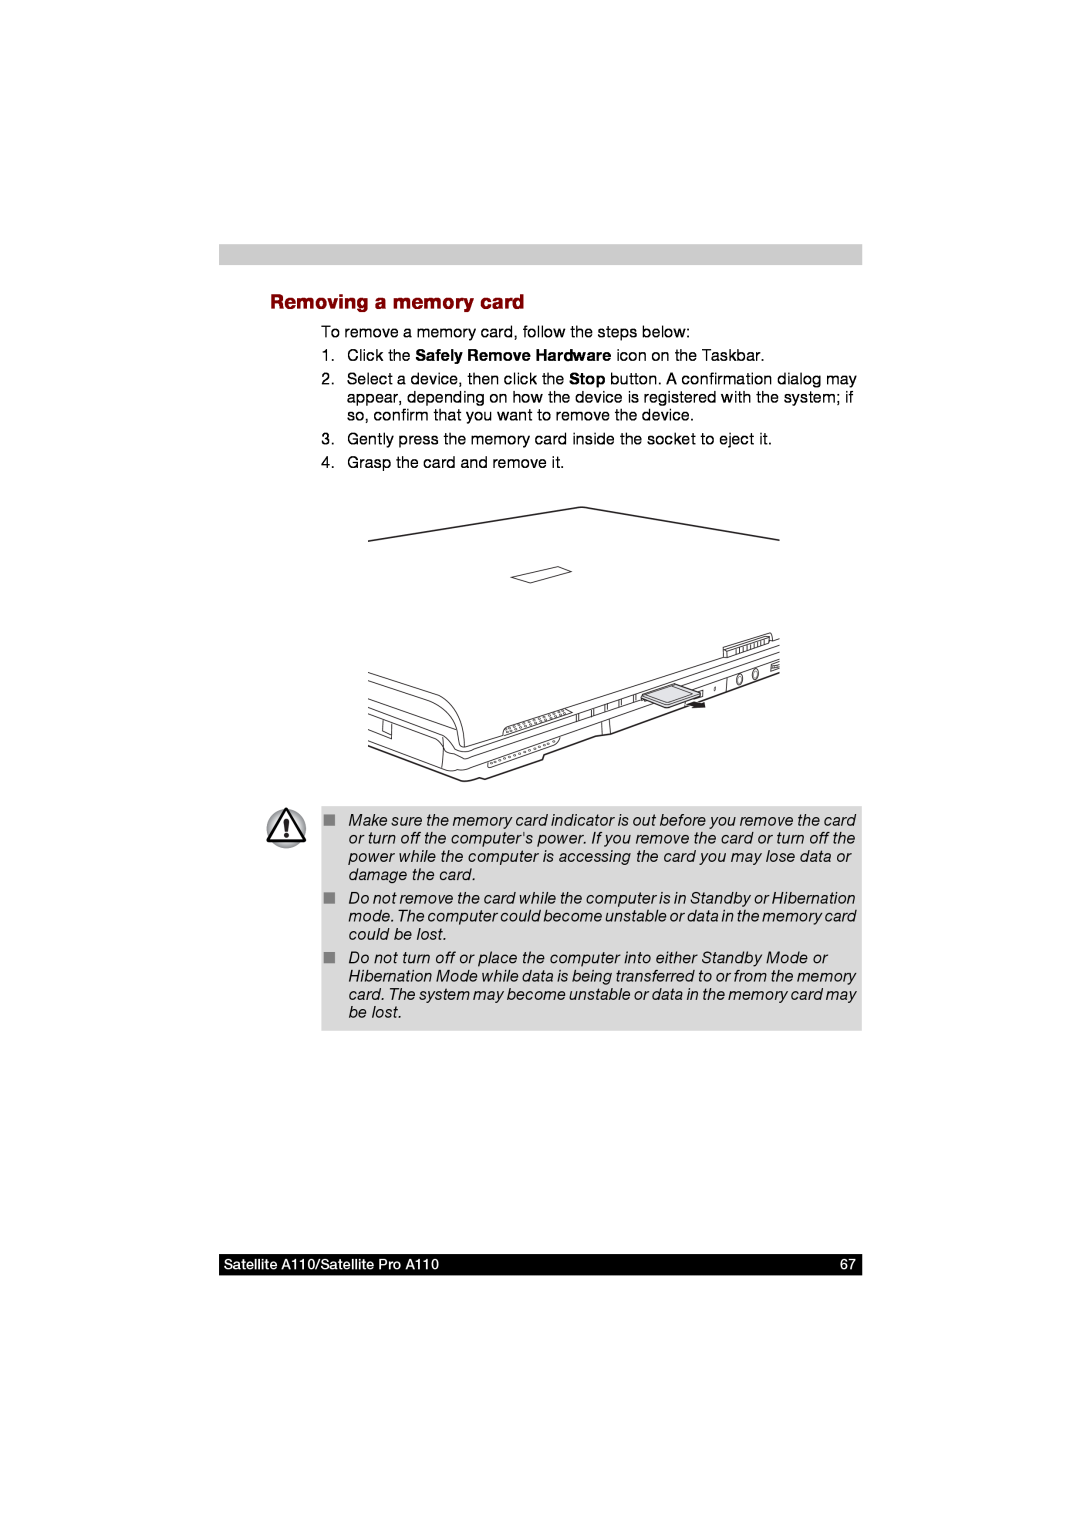 Toshiba A110 user manual Removing a memory card 